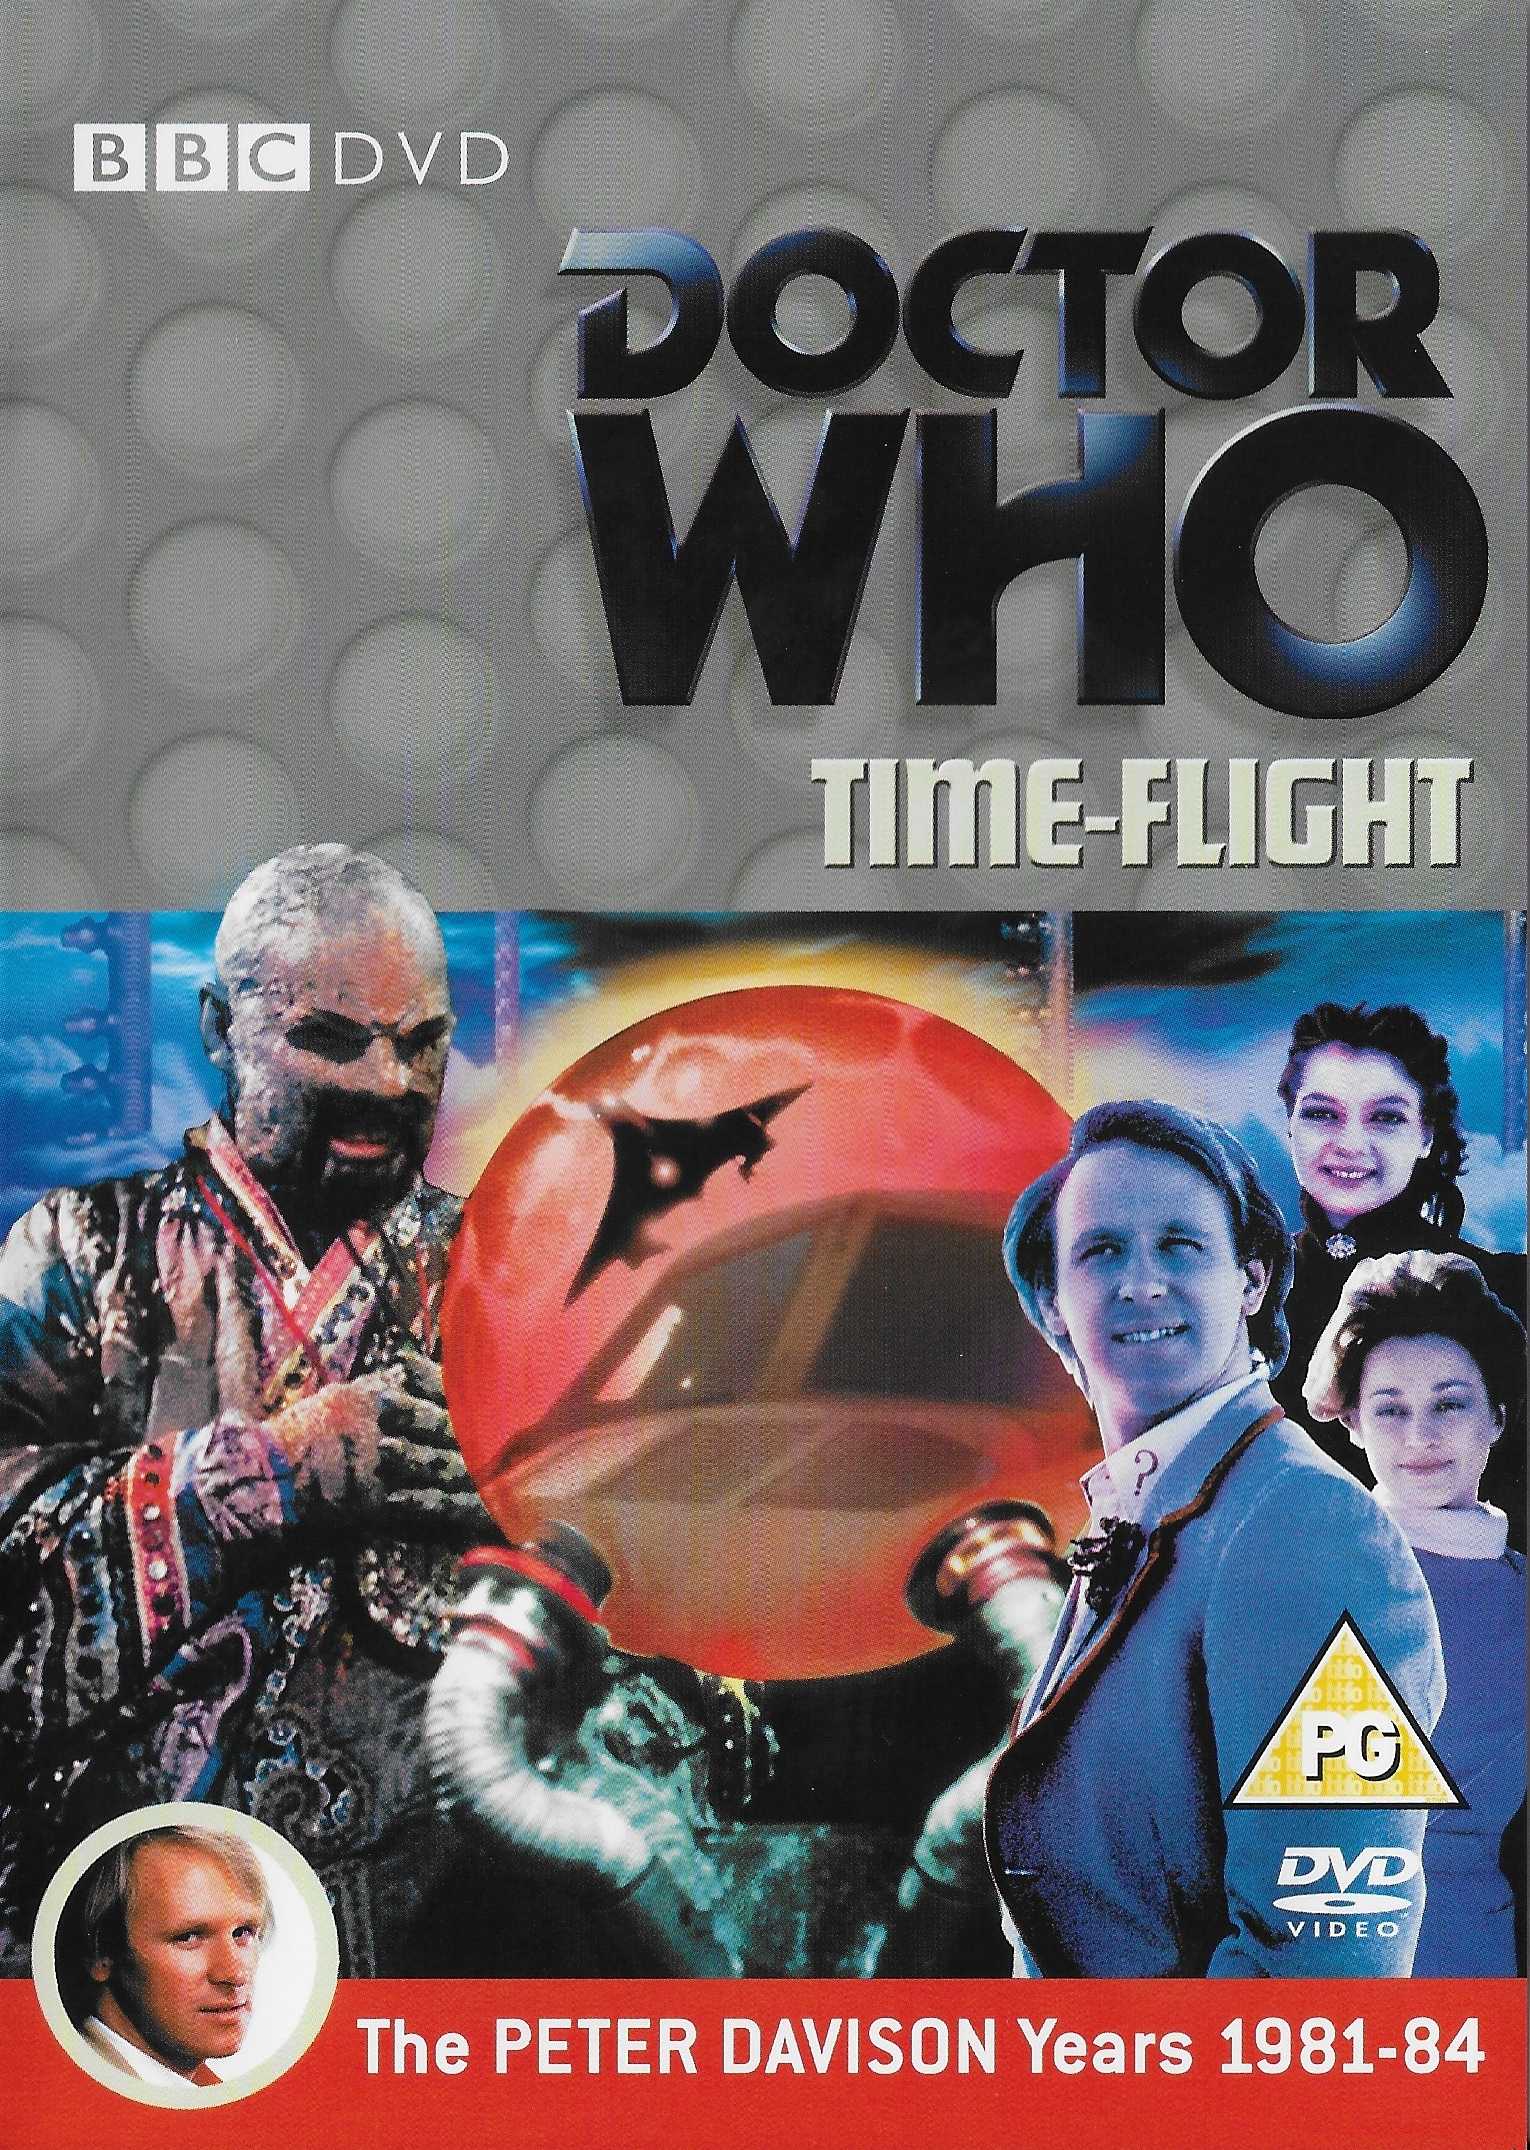 Picture of BBCDVD 2327A Doctor Who - Time-Flight by artist Peter Grimwade from the BBC dvds - Records and Tapes library